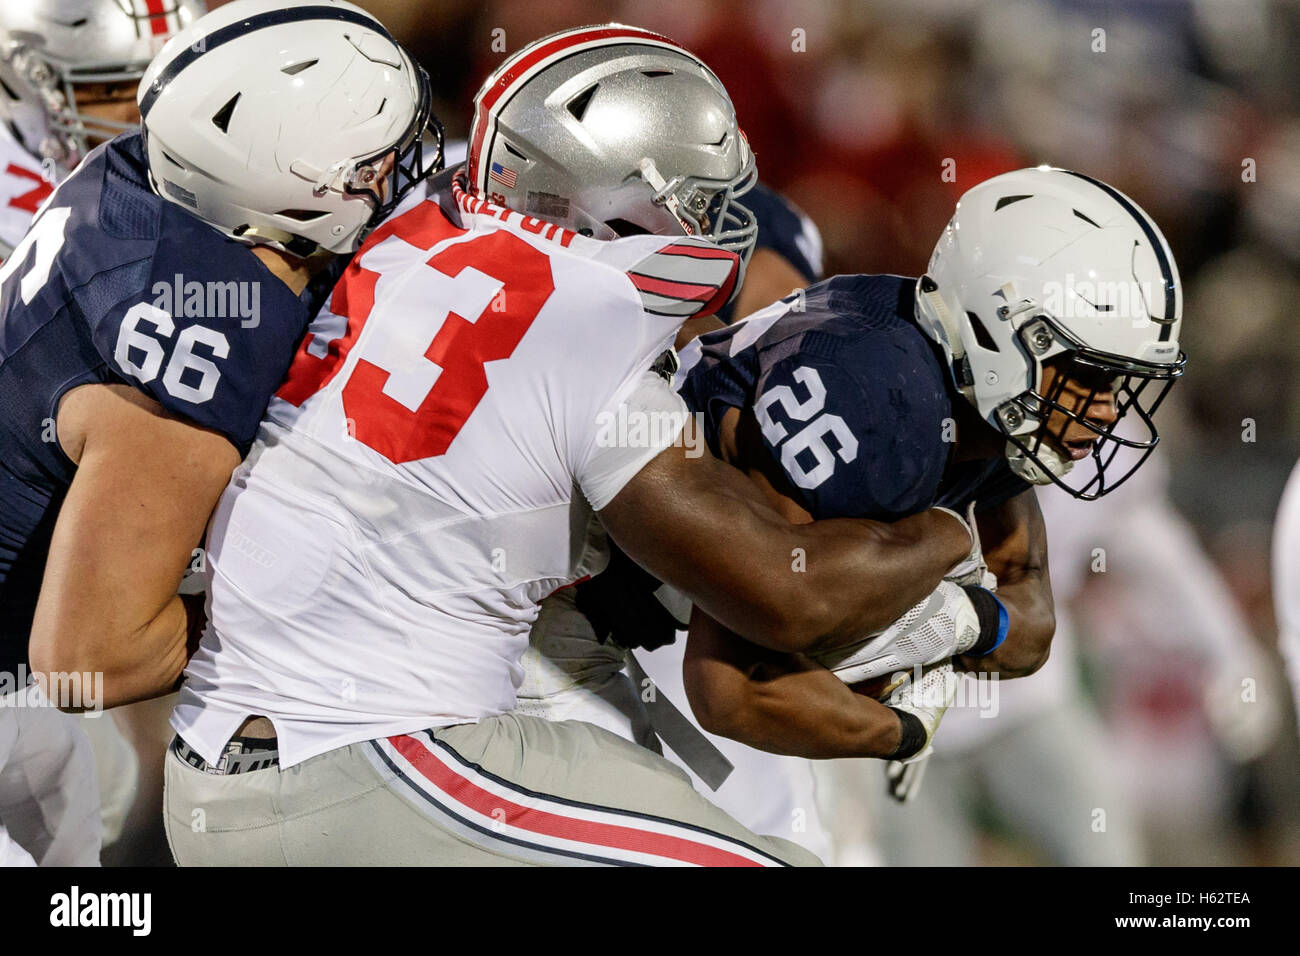 October 21, 2016 - University Park, Pennsylvania, USA - October 22nd, 2016: Ohio State Buckeyes defensive tackle Davon Hamilton (53) tackles Penn State Nittany Lions running back Saquon Barkley (26) during NCAA football game action between the Ohio State Buckeyes and the Penn State Nittany Lions at Beaver Stadium, University Park, PA. Photo by Adam Lacy/Zuma Wire (Credit Image: © Adam Lacy via ZUMA Wire) Stock Photo